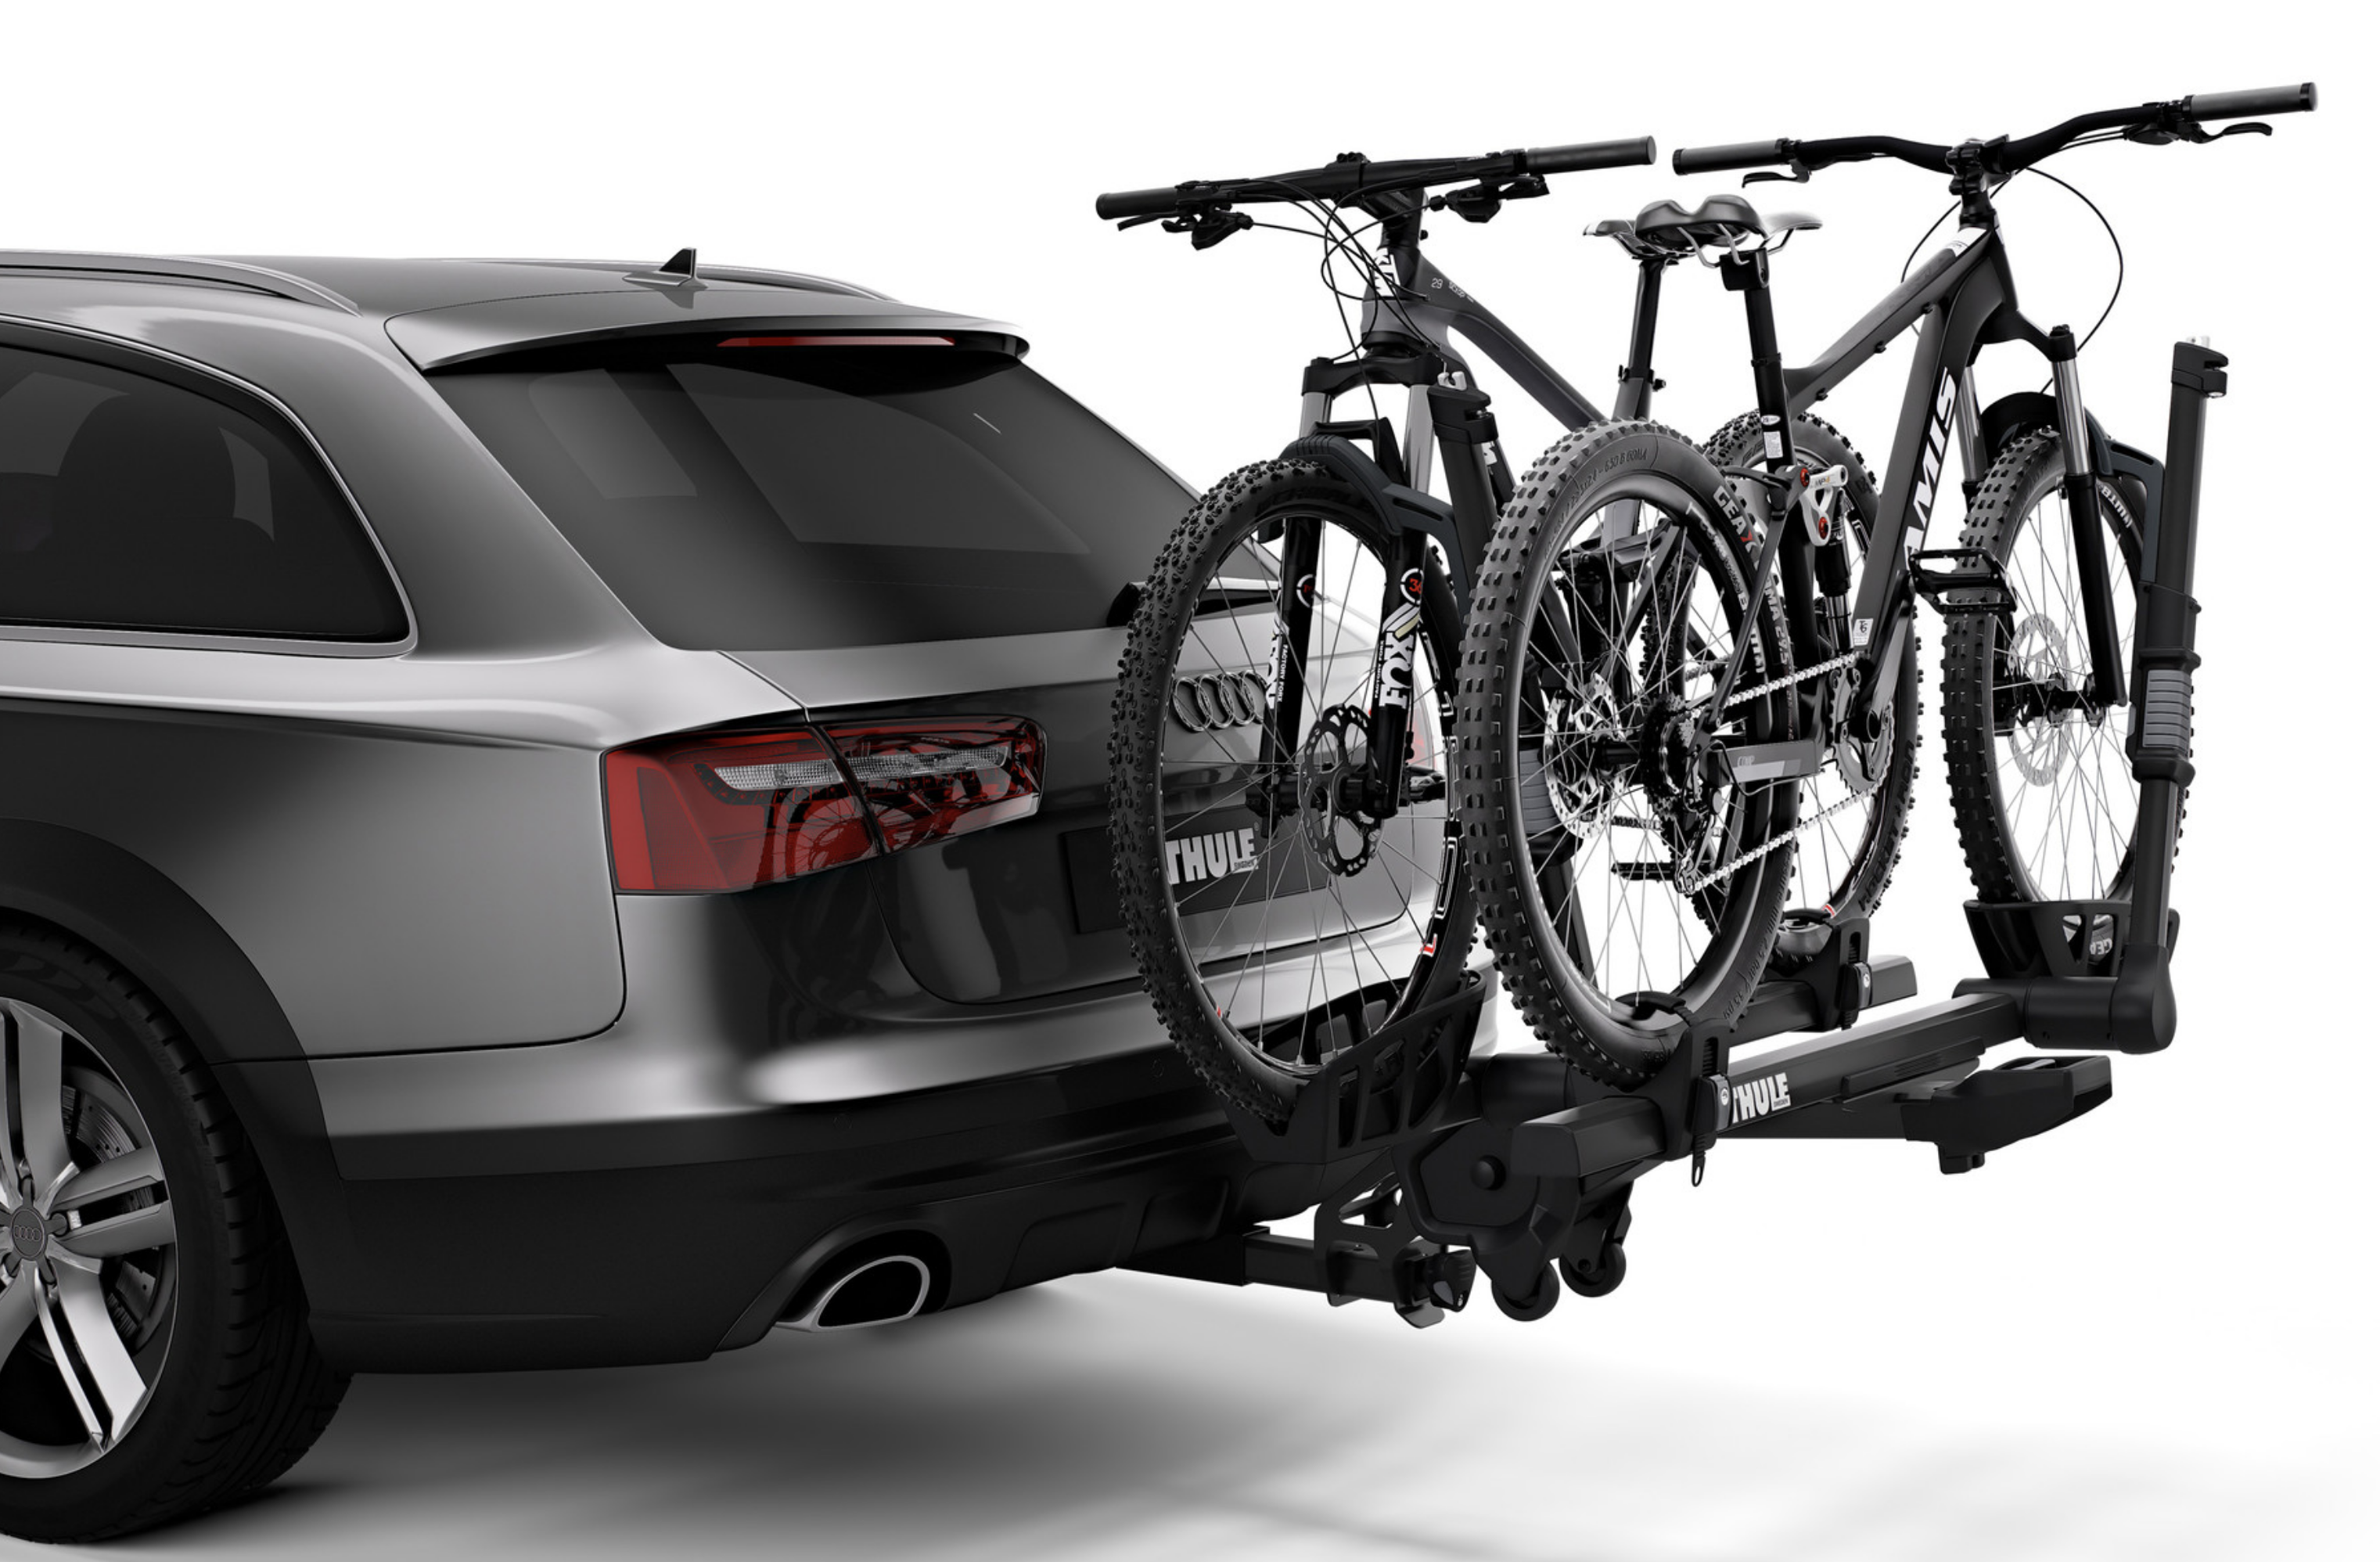 Thule T2 XTR Hitch Rack Locked and loaded with bikes